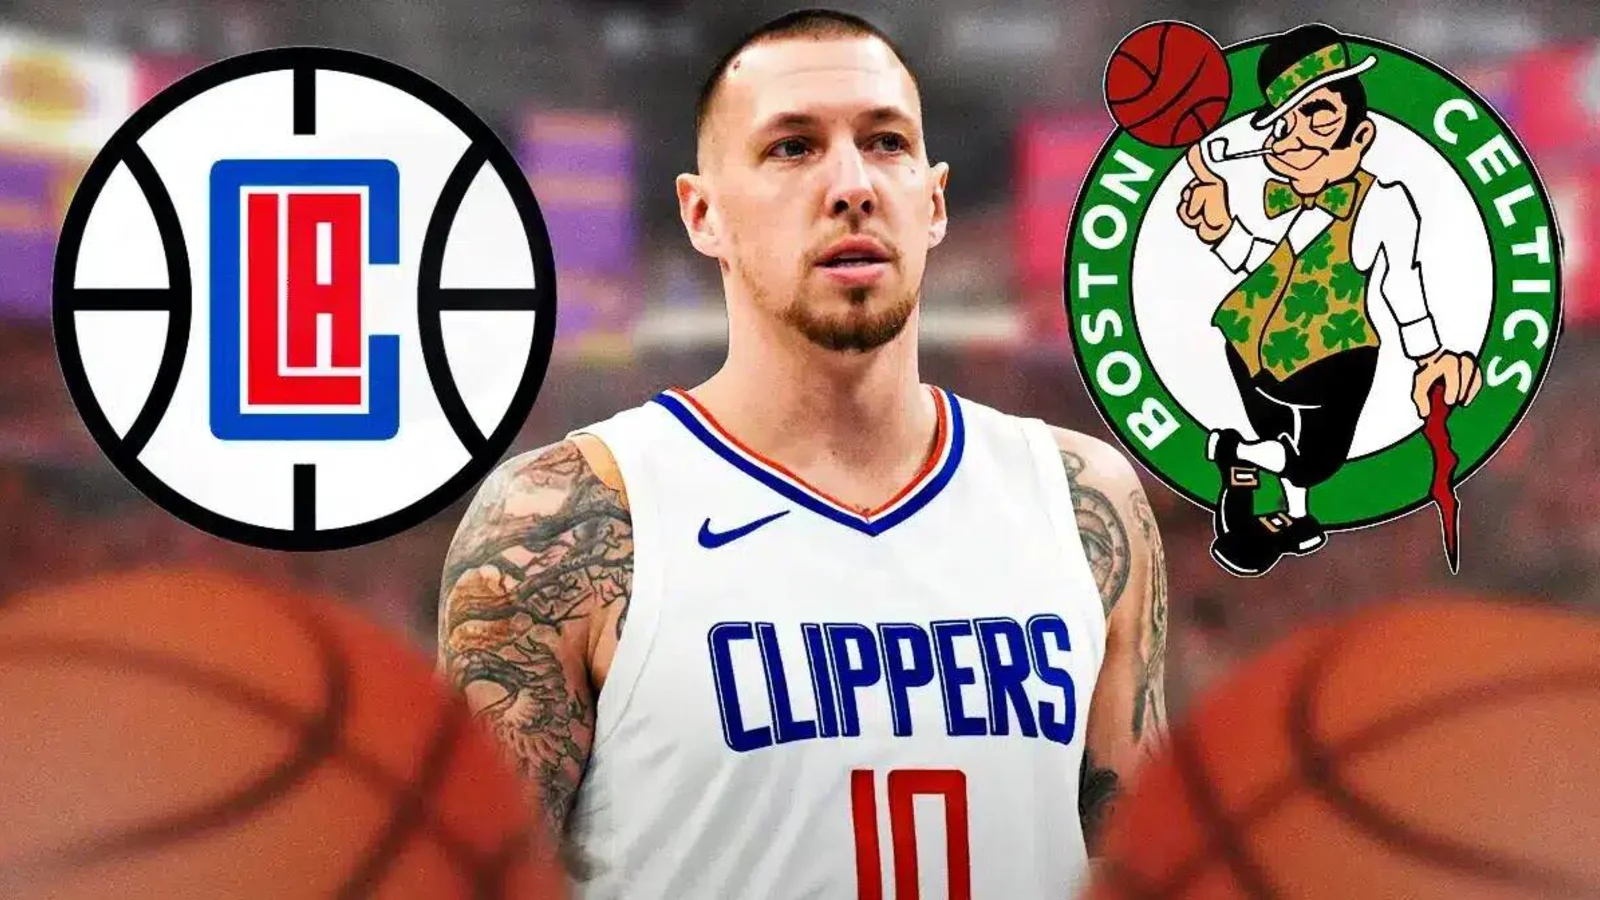 Daniel Theis reveals he considered Celtics reunion prior to landing with Clippers